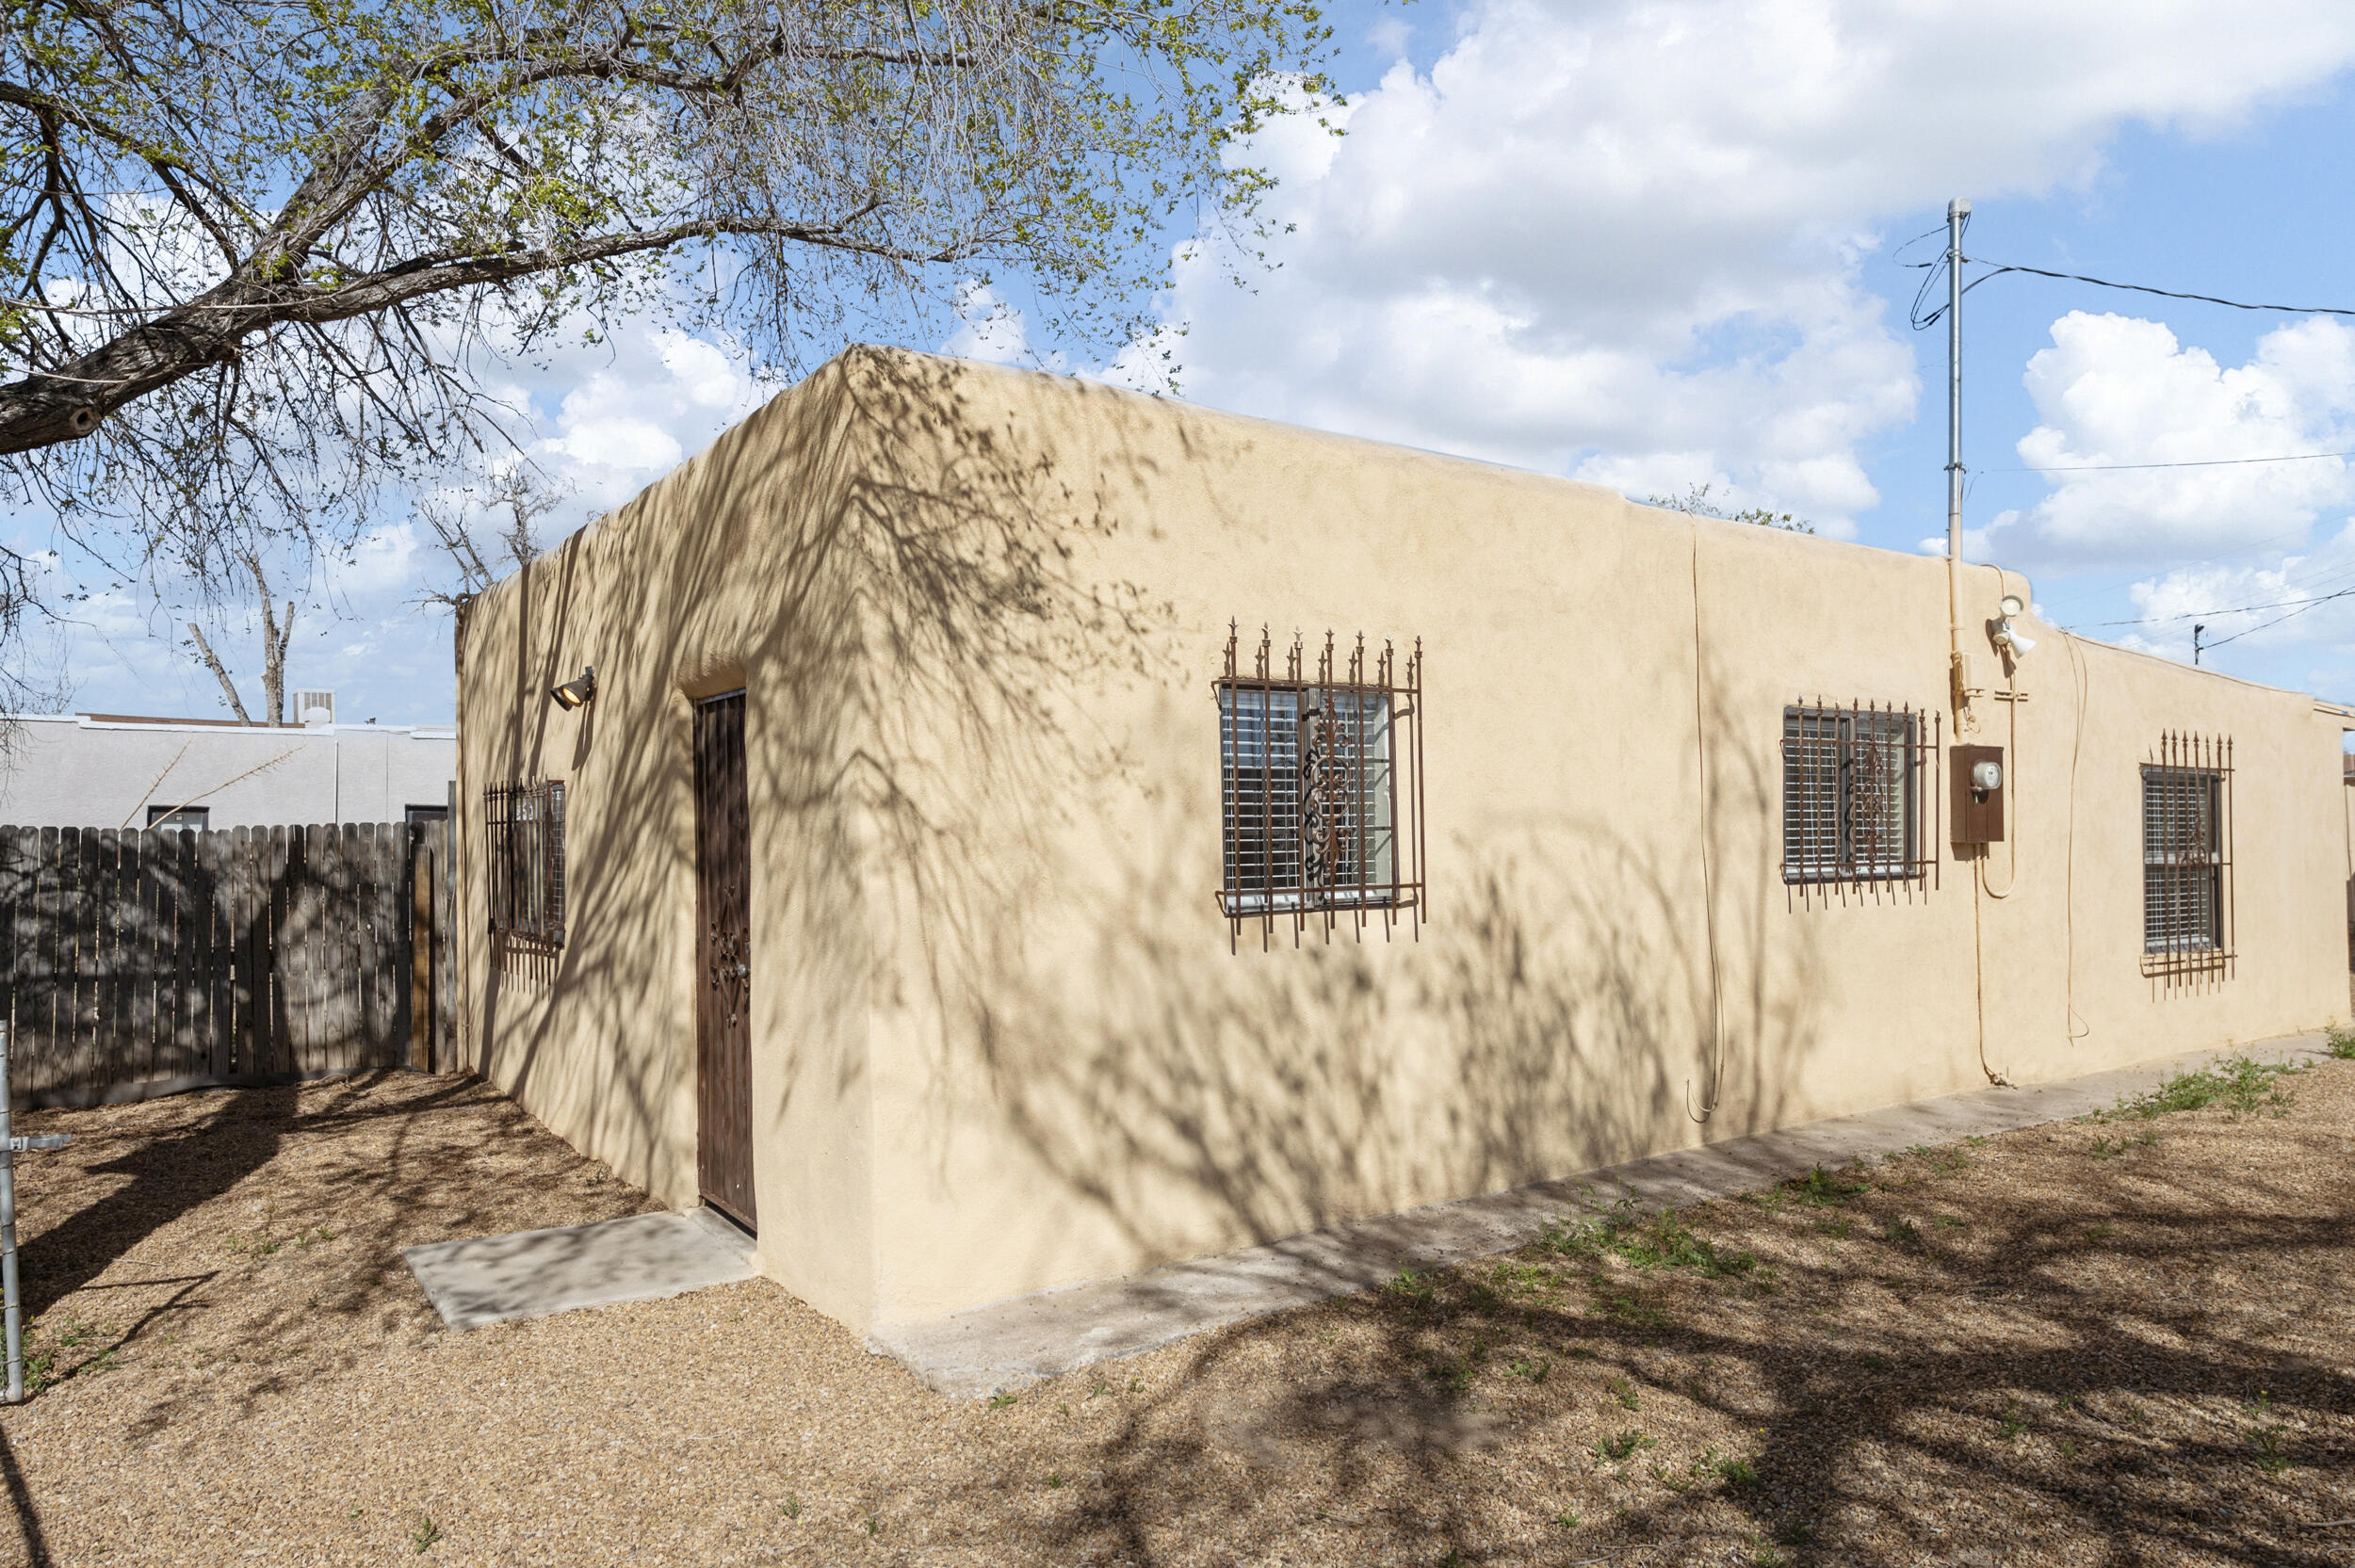 231 Southern Avenue SE, Albuquerque, New Mexico 87102, 2 Bedrooms Bedrooms, ,1 BathroomBathrooms,Residential,For Sale,231 Southern Avenue SE,1059517